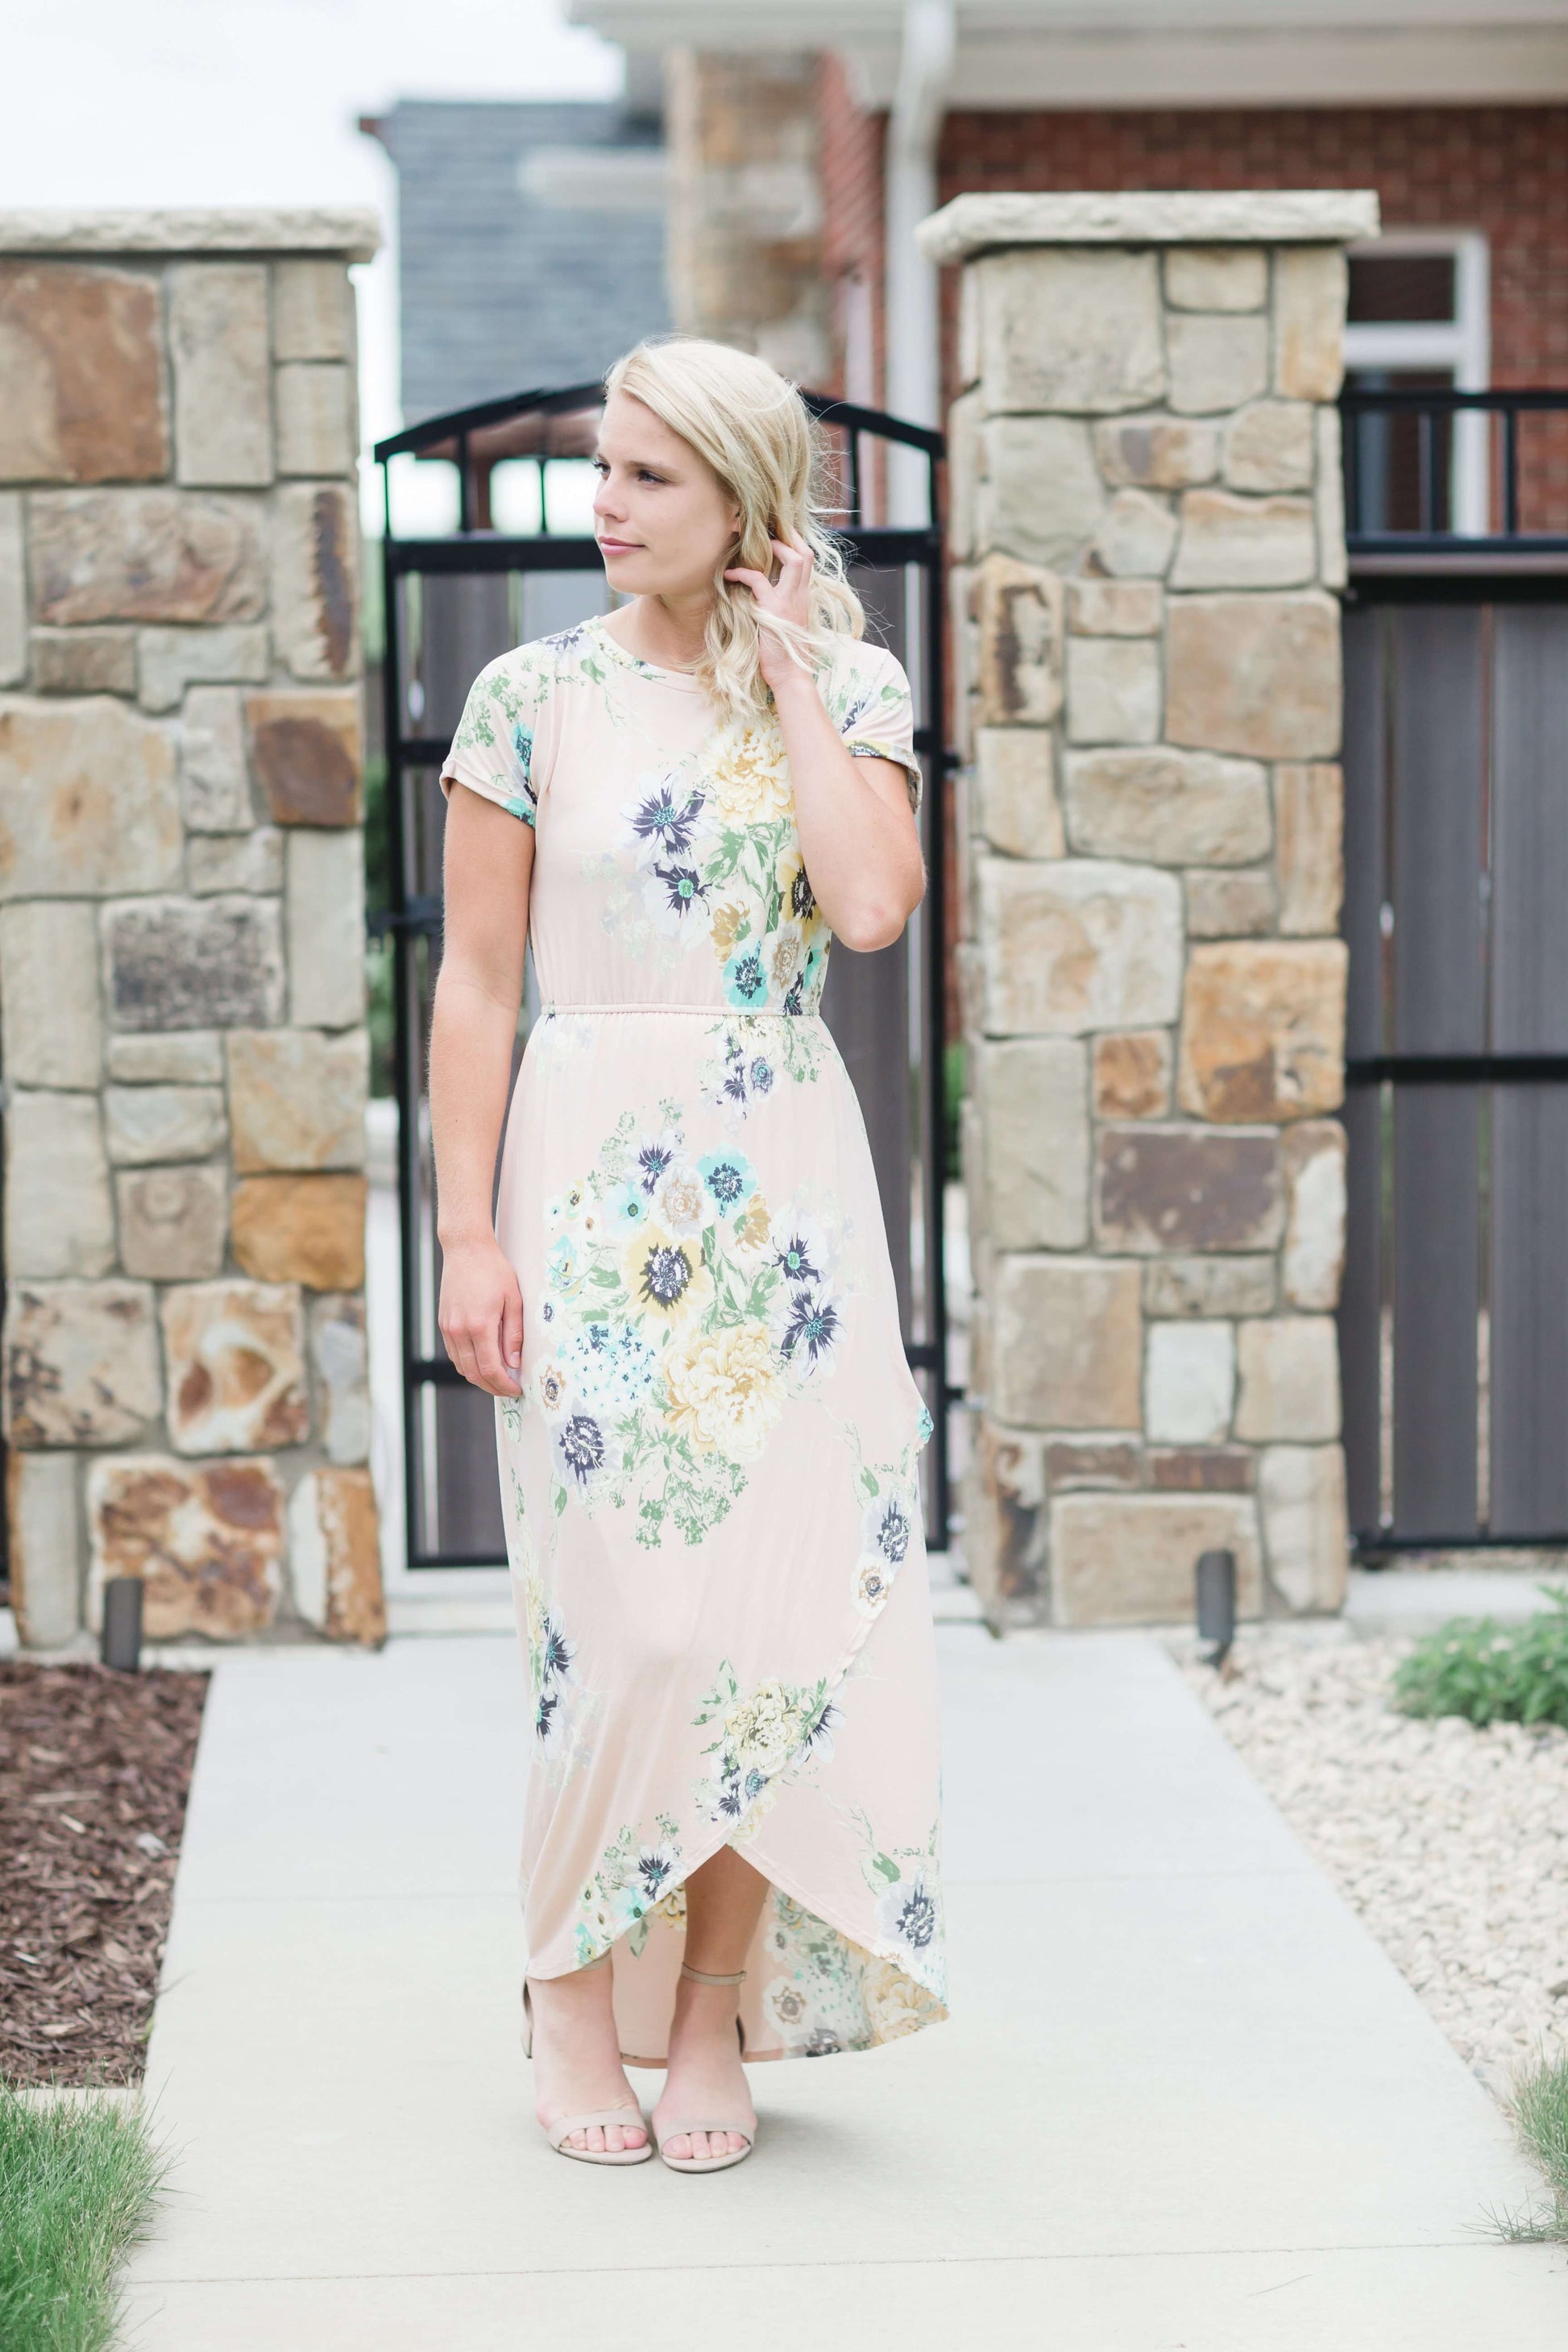 maxi length floral dress with elastic waist that comes in blush, mint or navy florals.